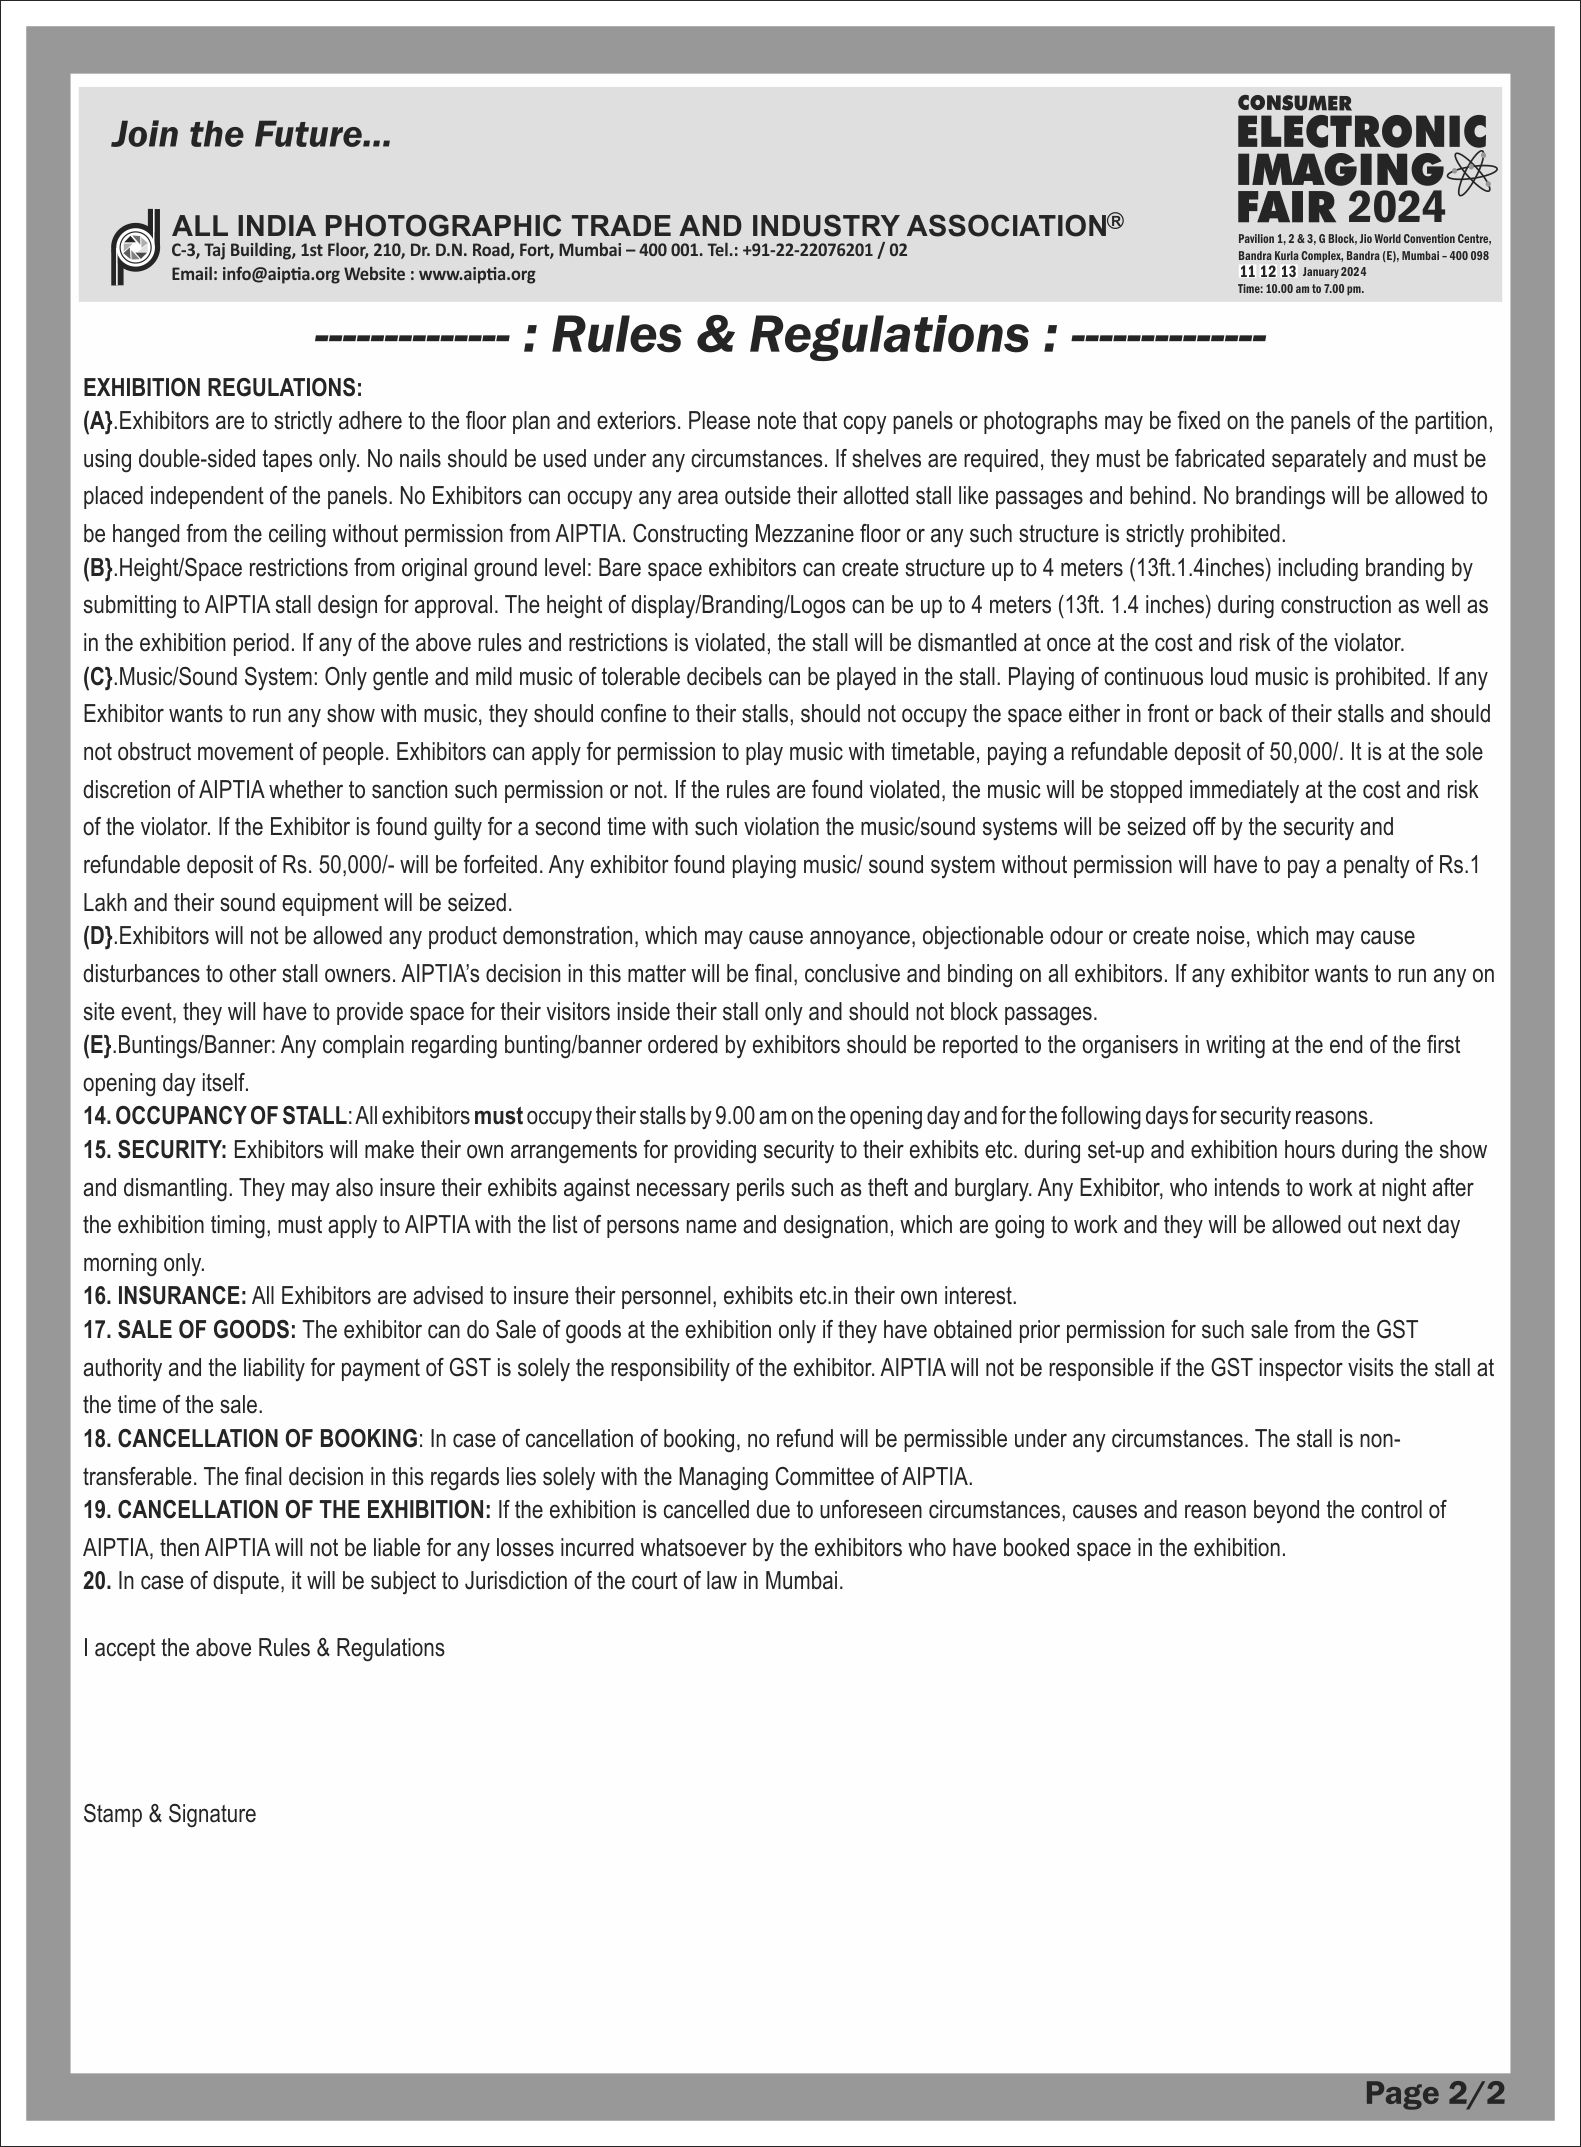 Rules & Regulations_14-10_Page-2